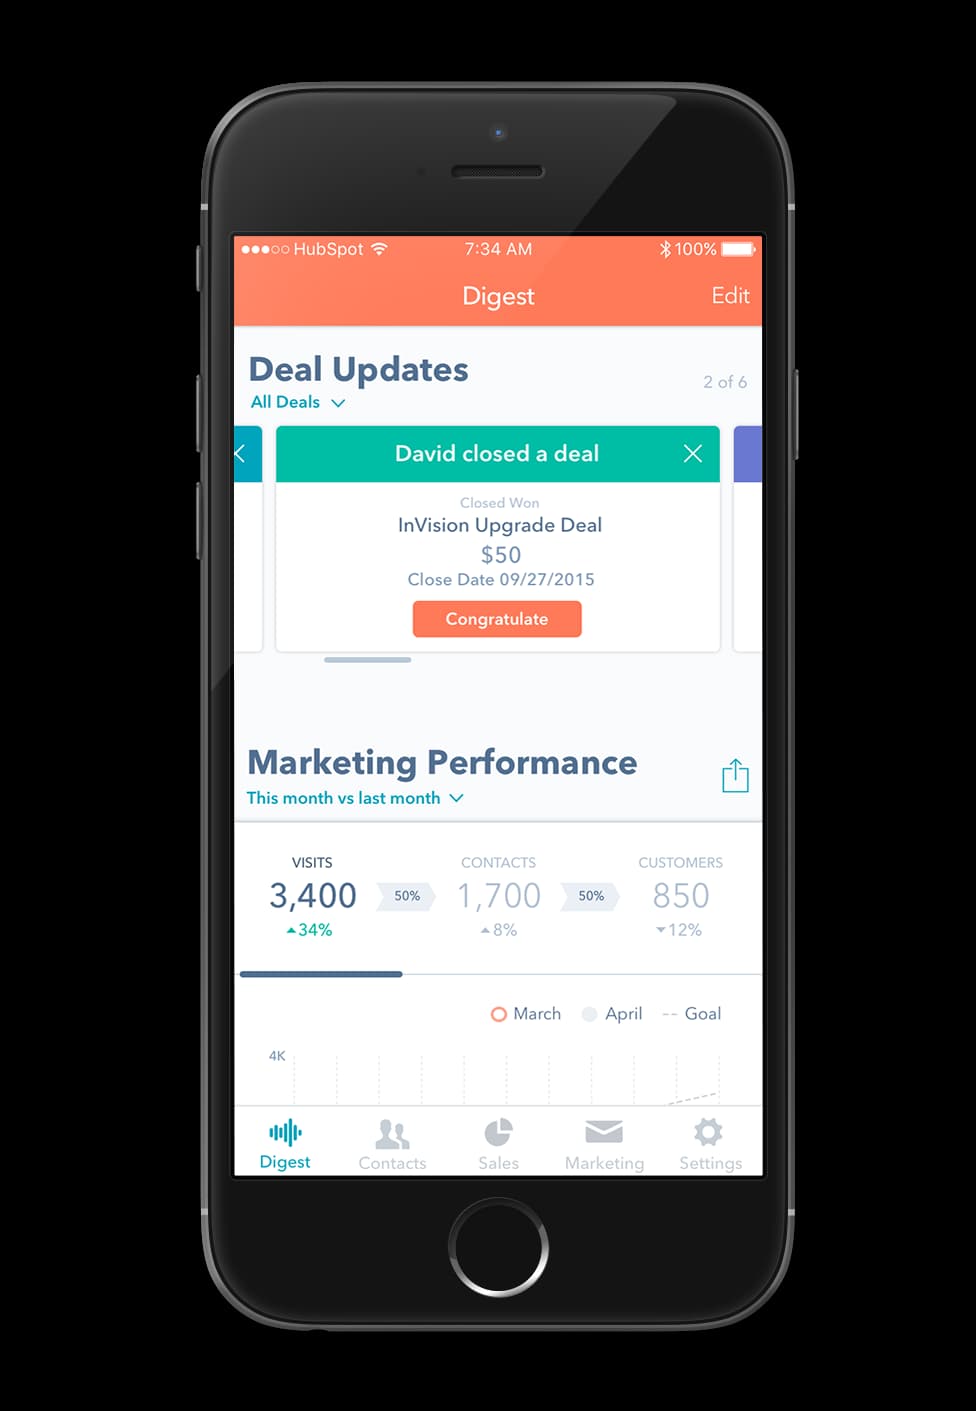 Mobile CRM solution from HubSpot.